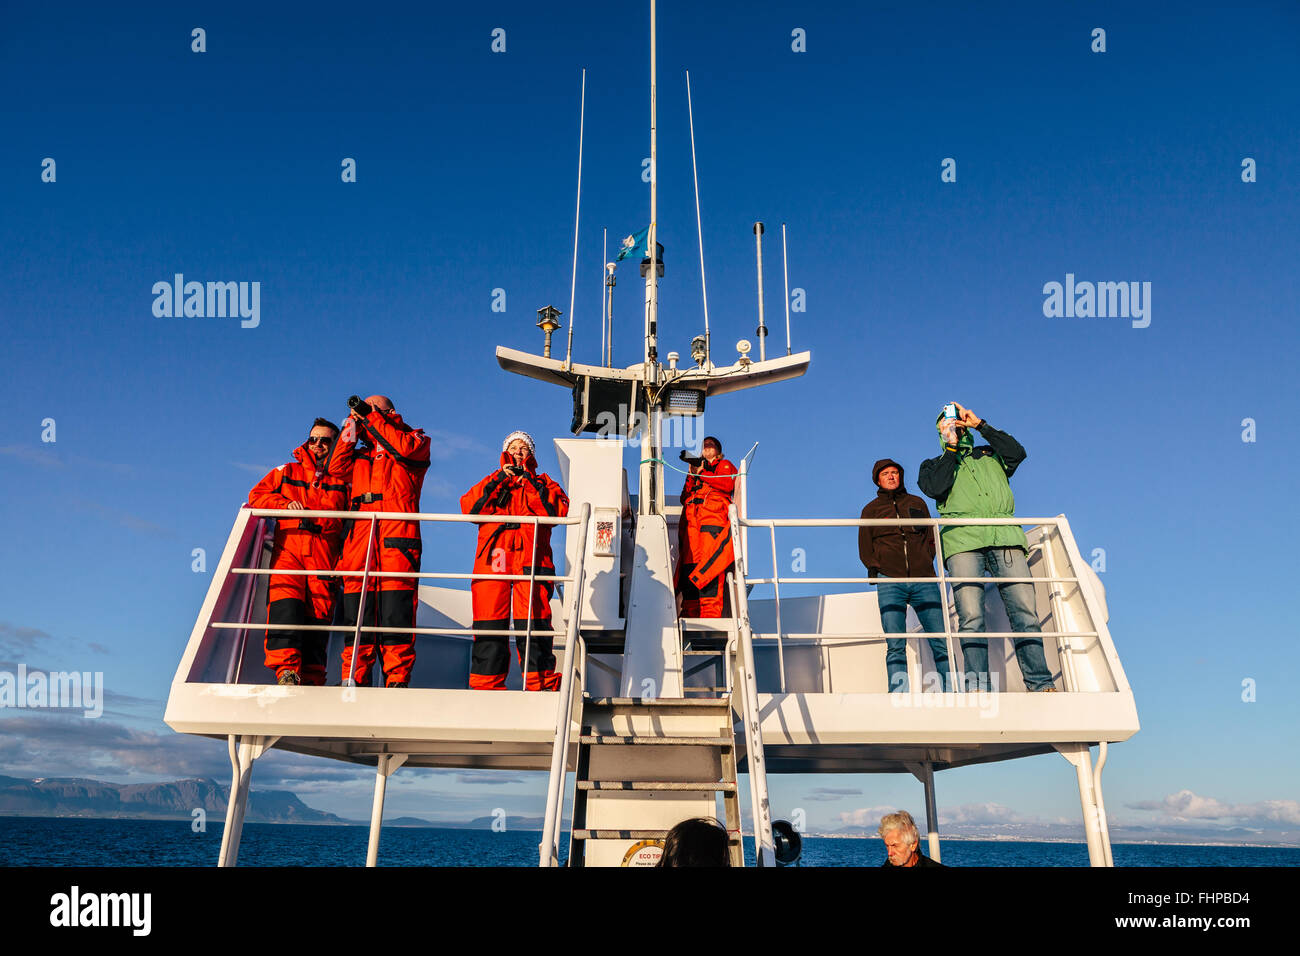 Whale Watching in Island Stockfoto